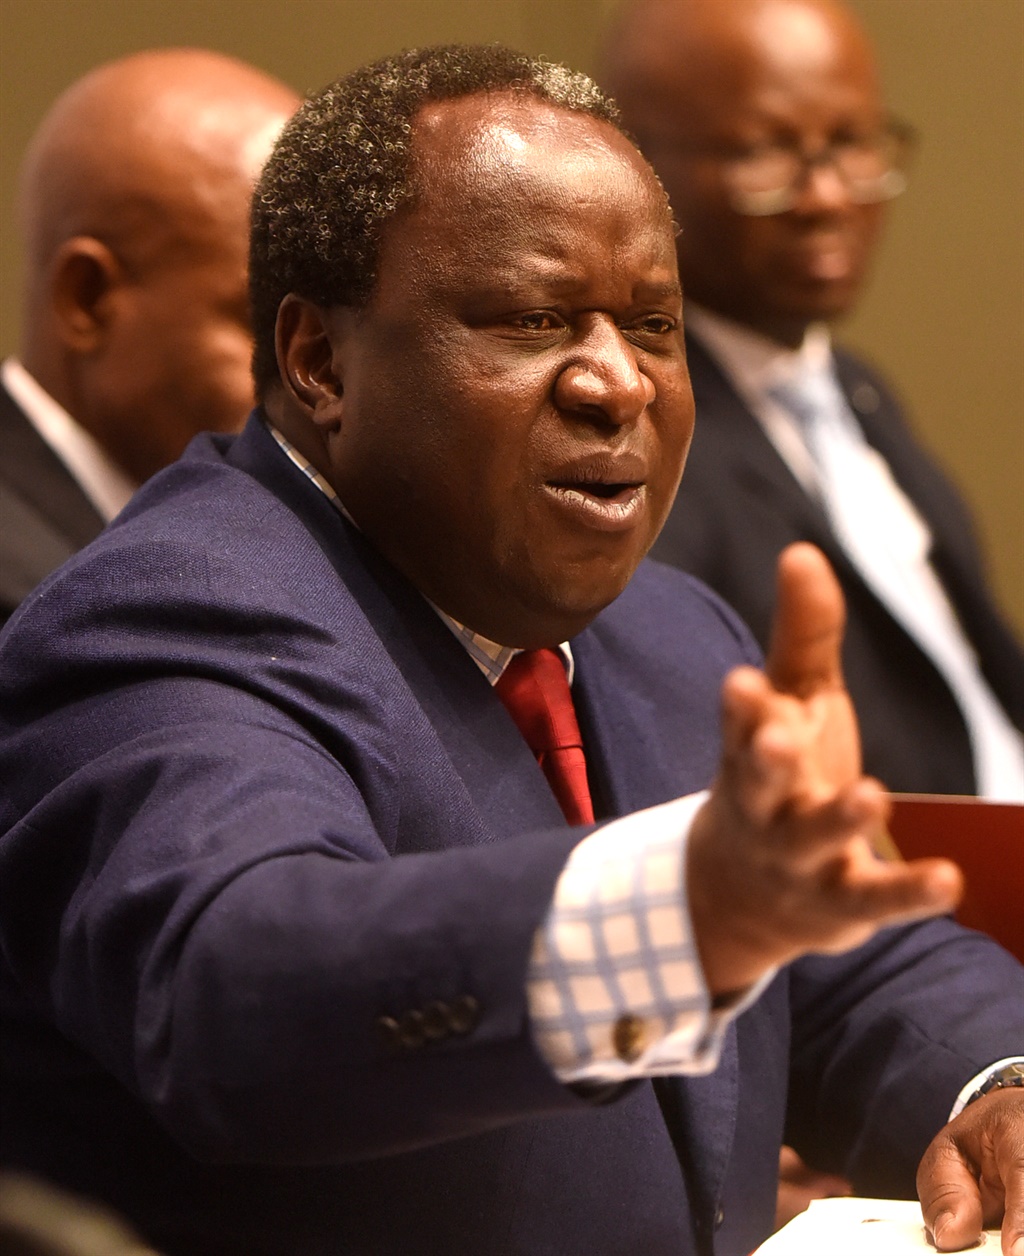 CAPE TOWN, SOUTH AFRICA ? FEBRUARY 20: Finance minister Tito Mboweni at the press conference before he delivers his 2019 budget speech in Parliament on February 20, 2019 in Cape Town, South Africa. Mboweni, a former SA Reserve Bank governor delivered his first annual budget speech as minister of Finance amid socio-economic and political issues in the country. (Photo by Gallo Images)